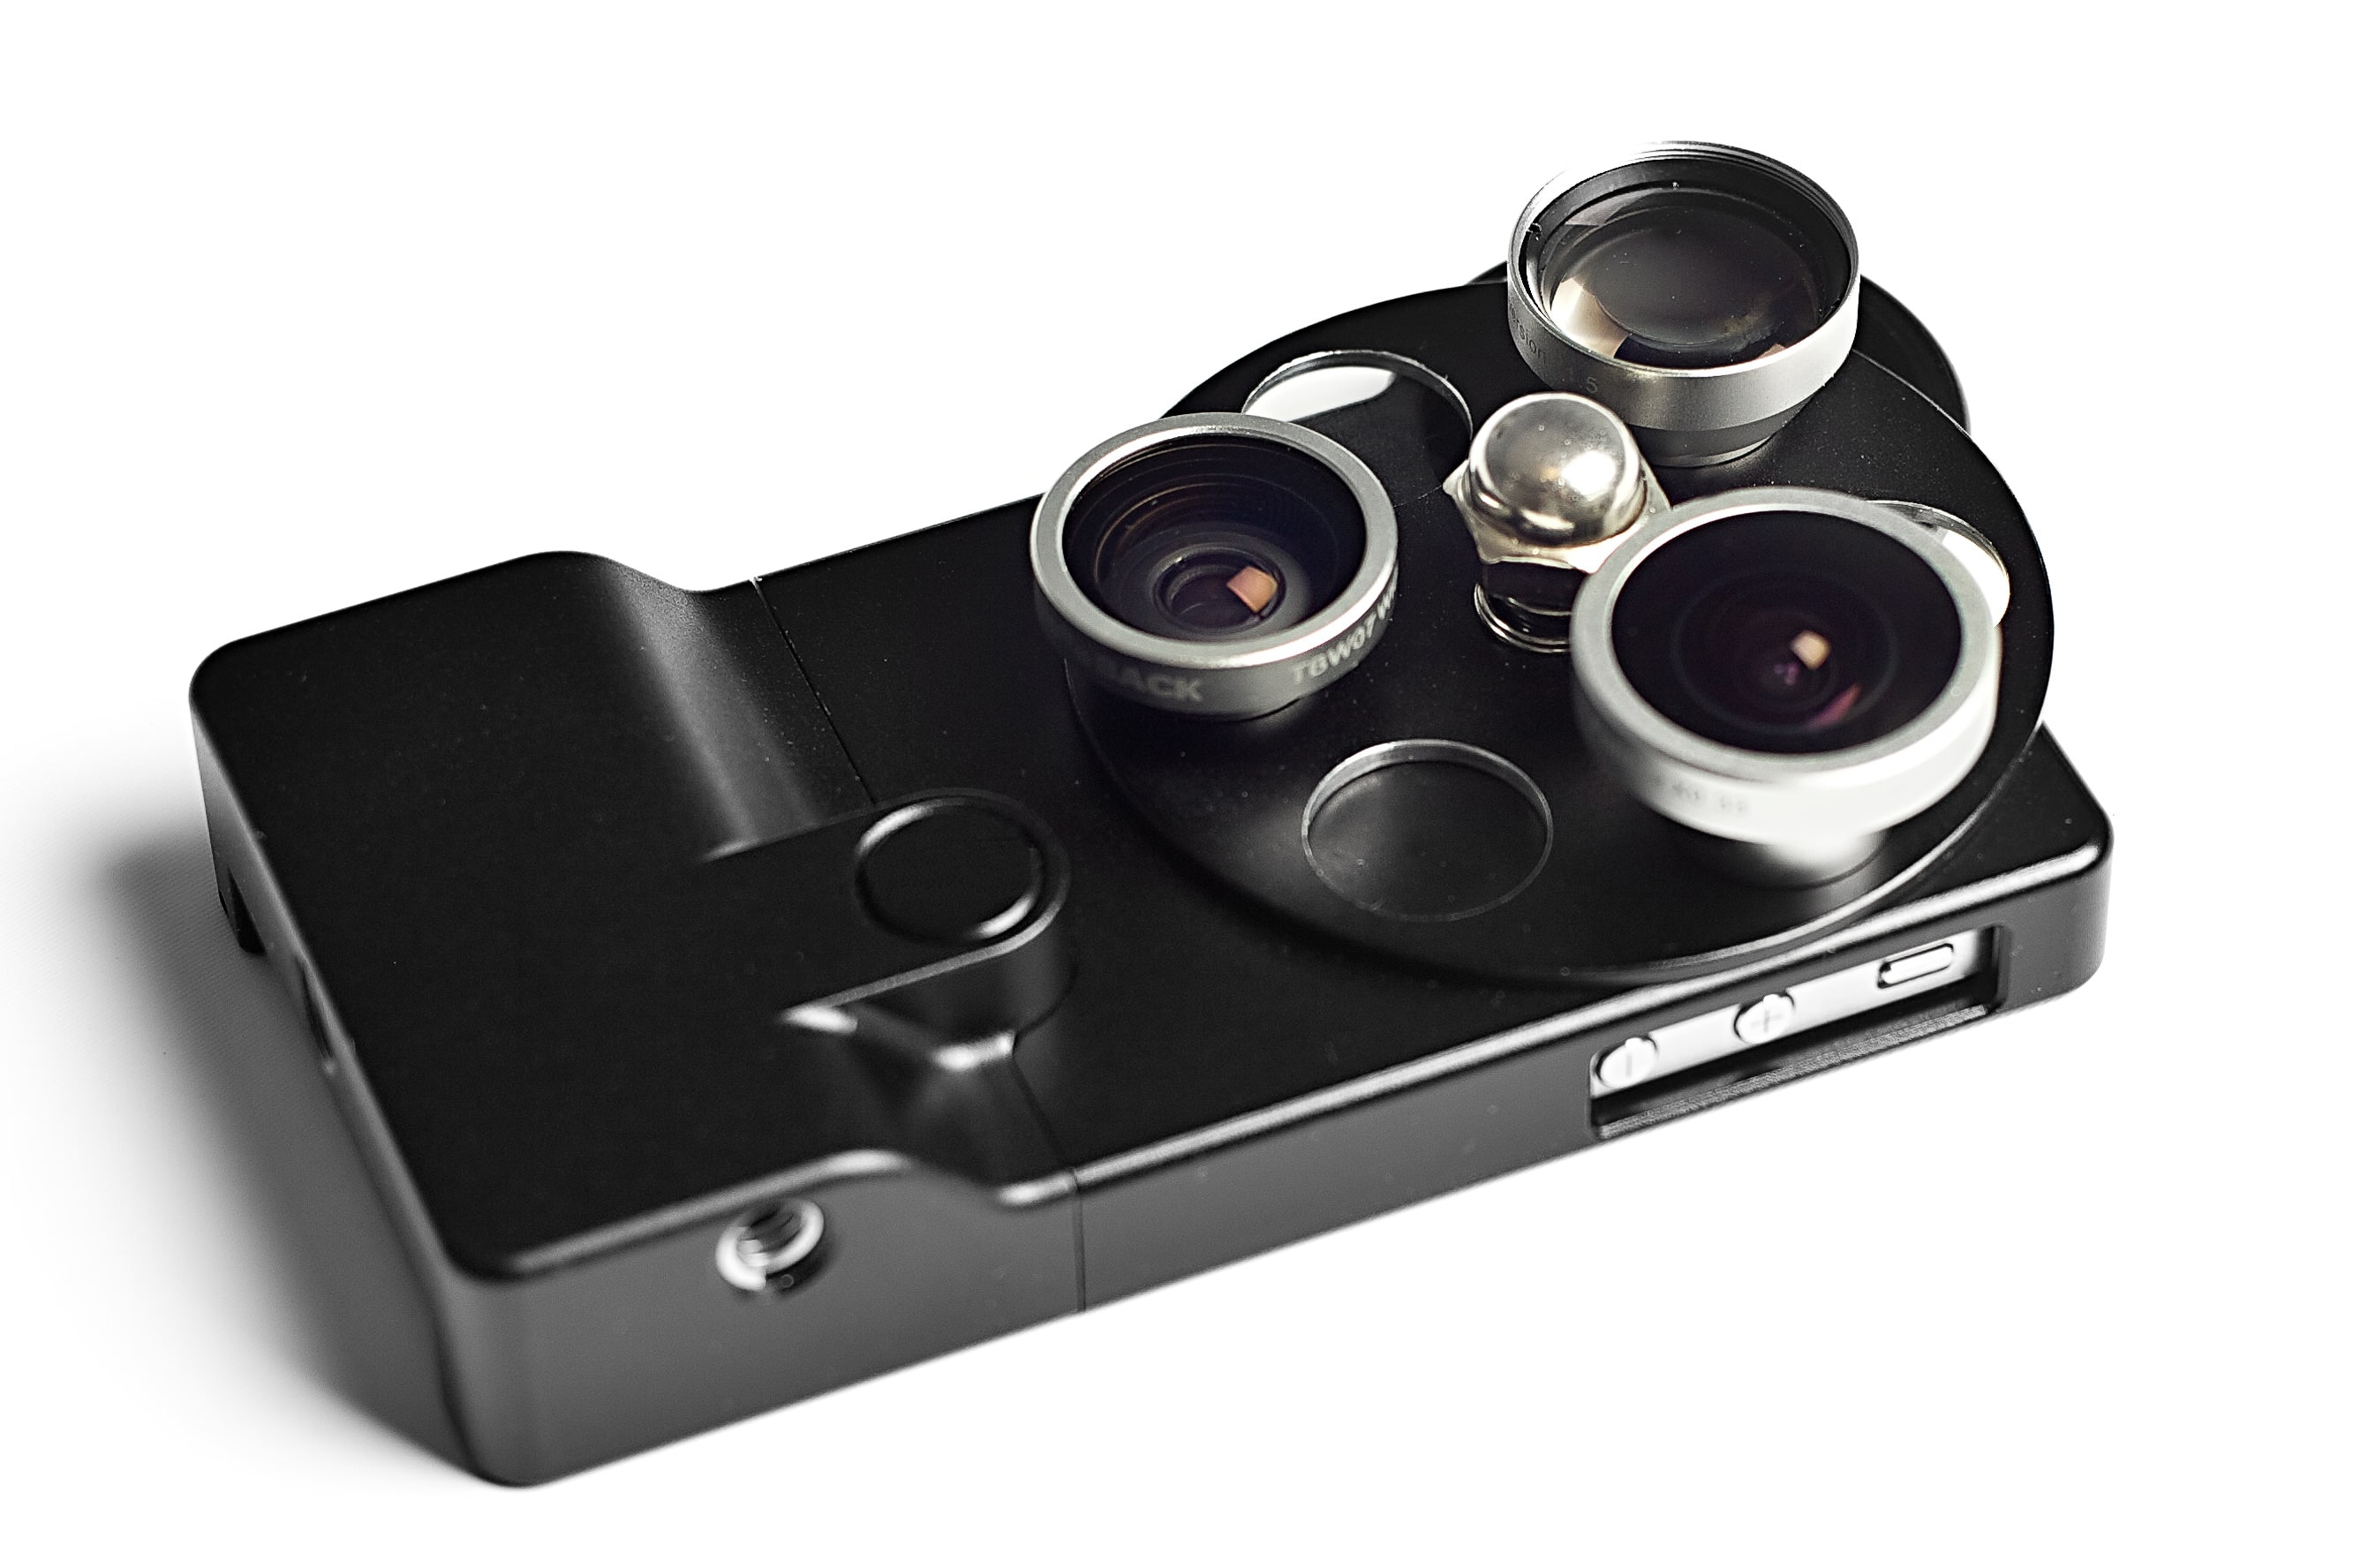 Dial: Professional Photography Accessory For Your iPhone | Bit Rebels